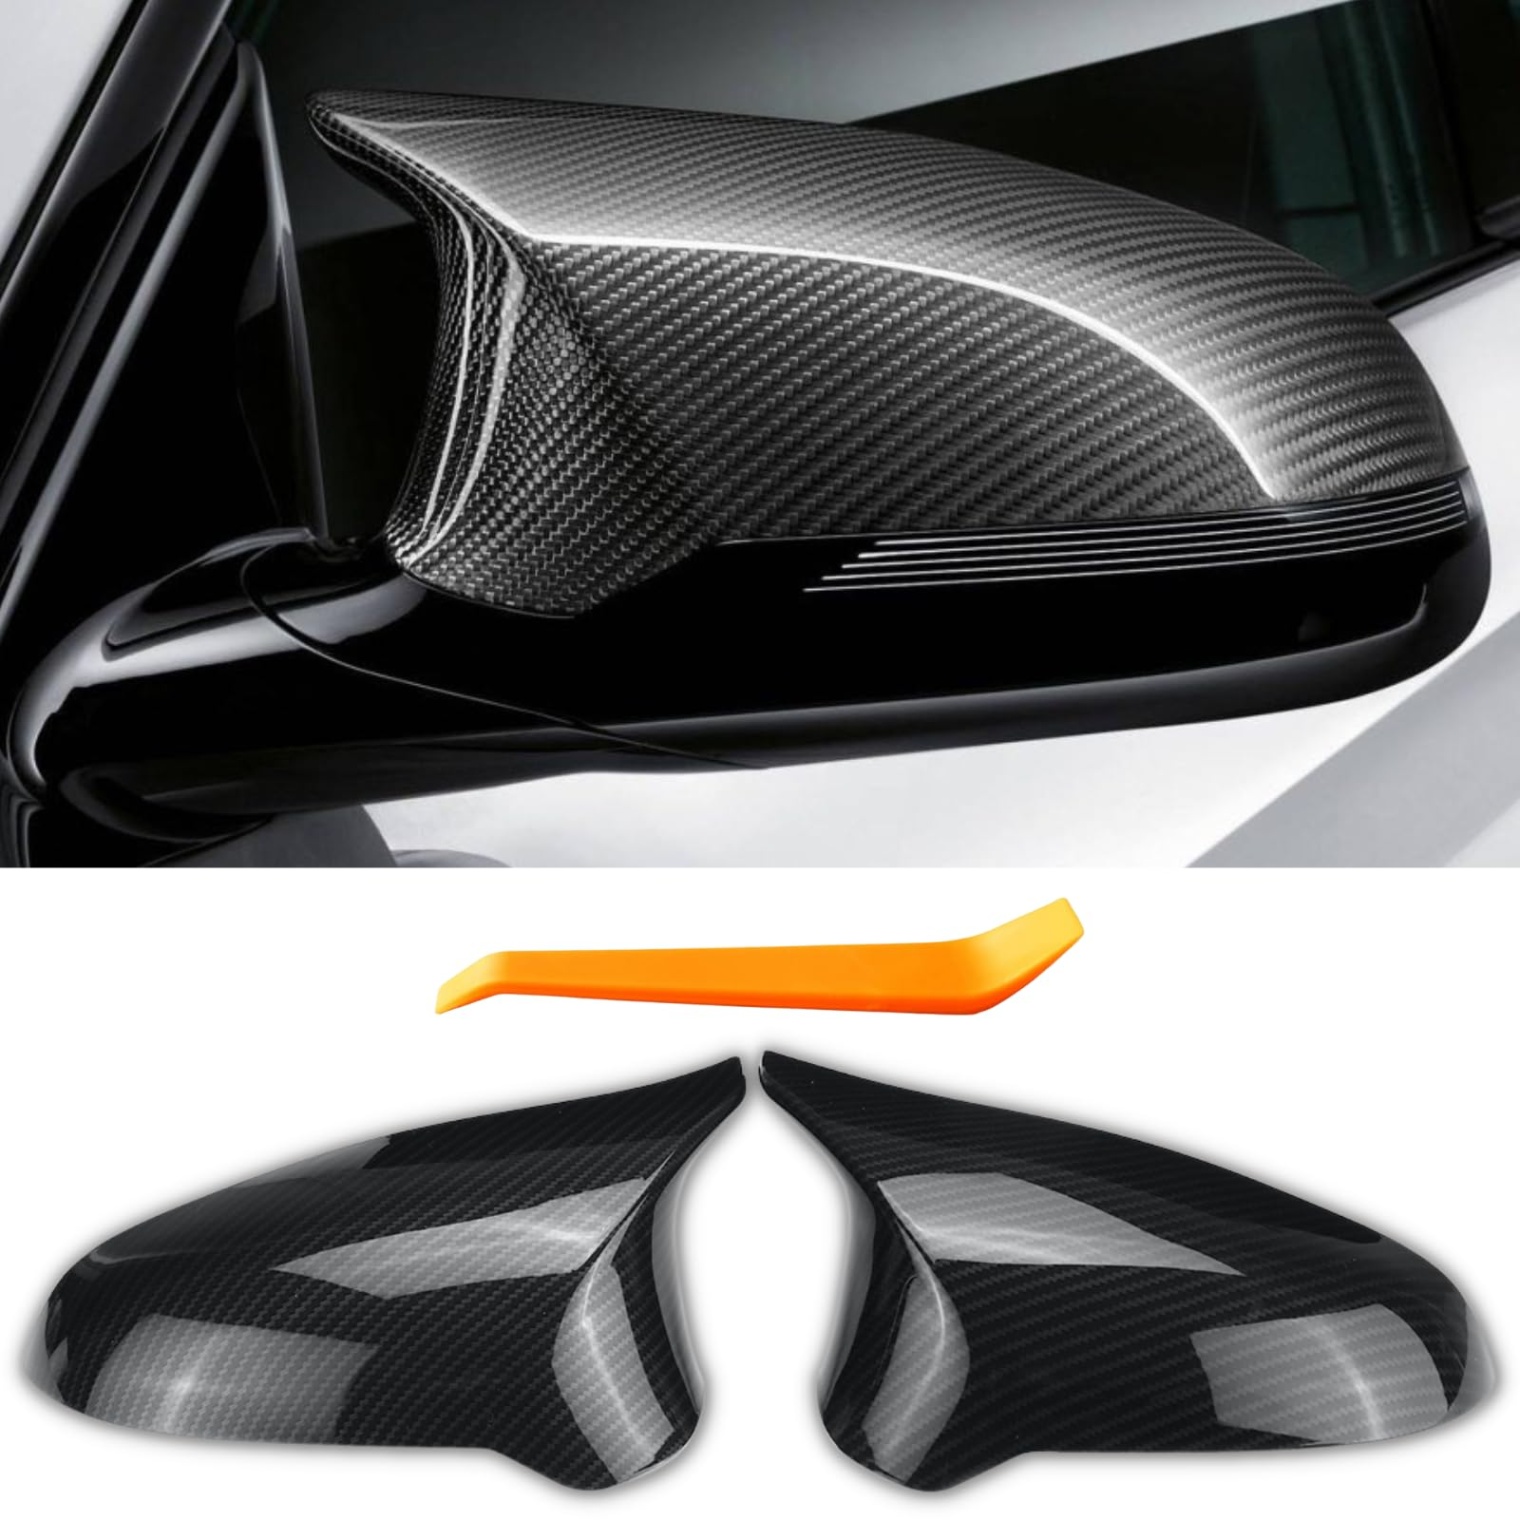 bmw m4 accessories Bulan 5 M Sport Side Carbon Fiber Mirror Cover Caps Replacement for - BMW  M/F F M/F M/F Accessories Exterior Trim Body Parts Tuning, Pair